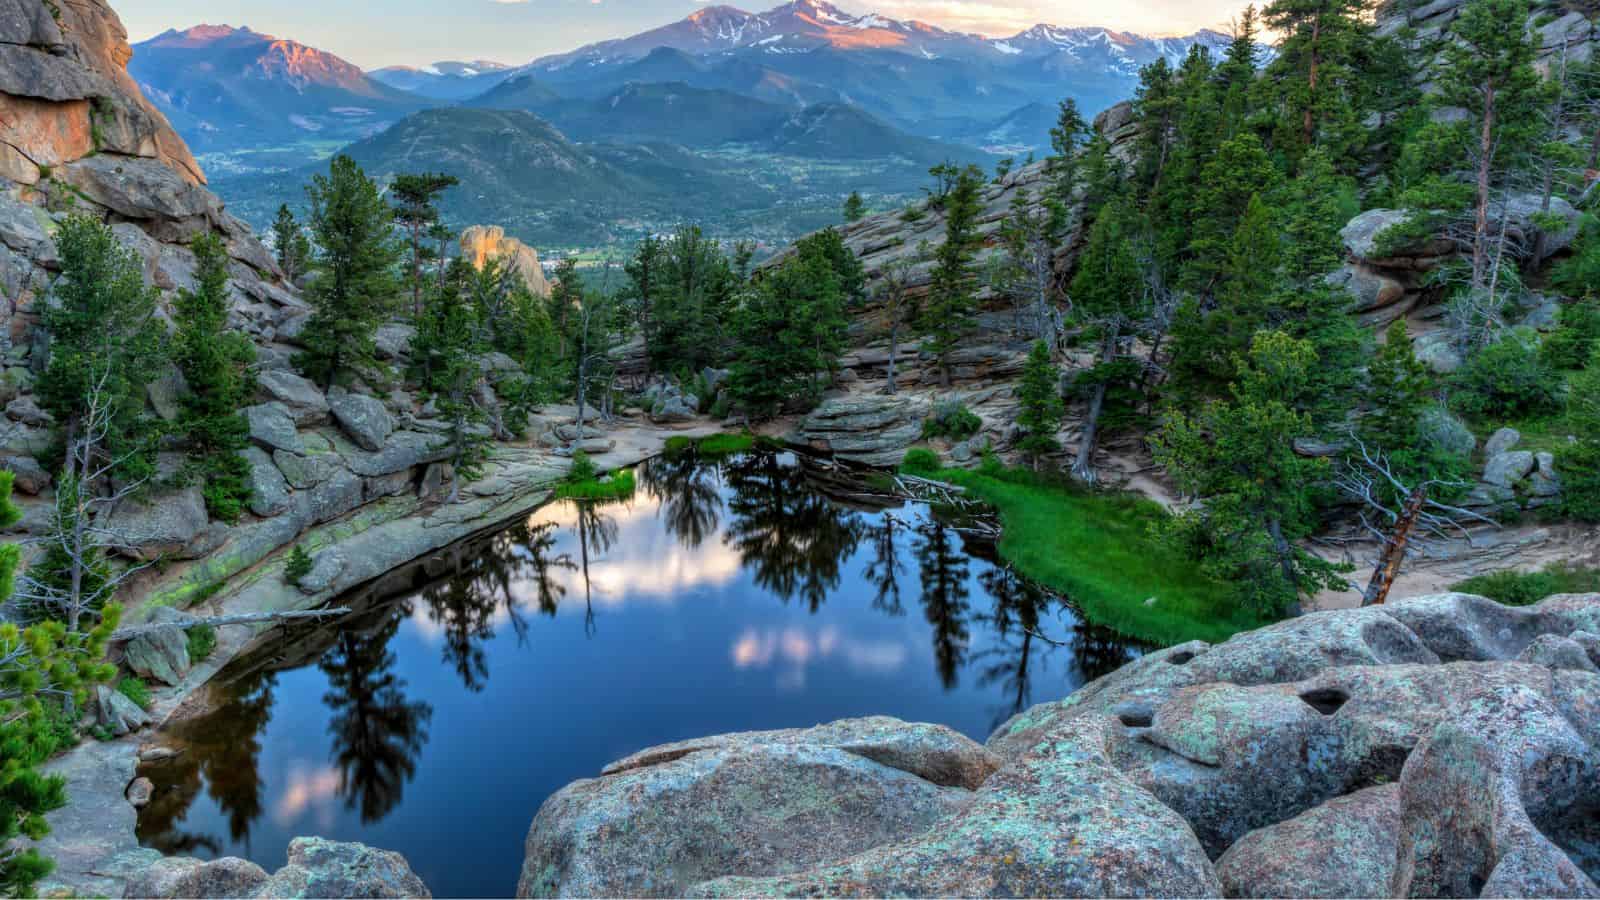 <p>This park in the Rocky Mountains of north-central Colorado is known for its alpine lakes and varied environments with wildlife like bighorn sheep and elk. Visitors can drive the 48-mile Trail Ridge Road, the highest continuous paved road in the U.S., with panoramic views of mountain peaks and valleys.</p>